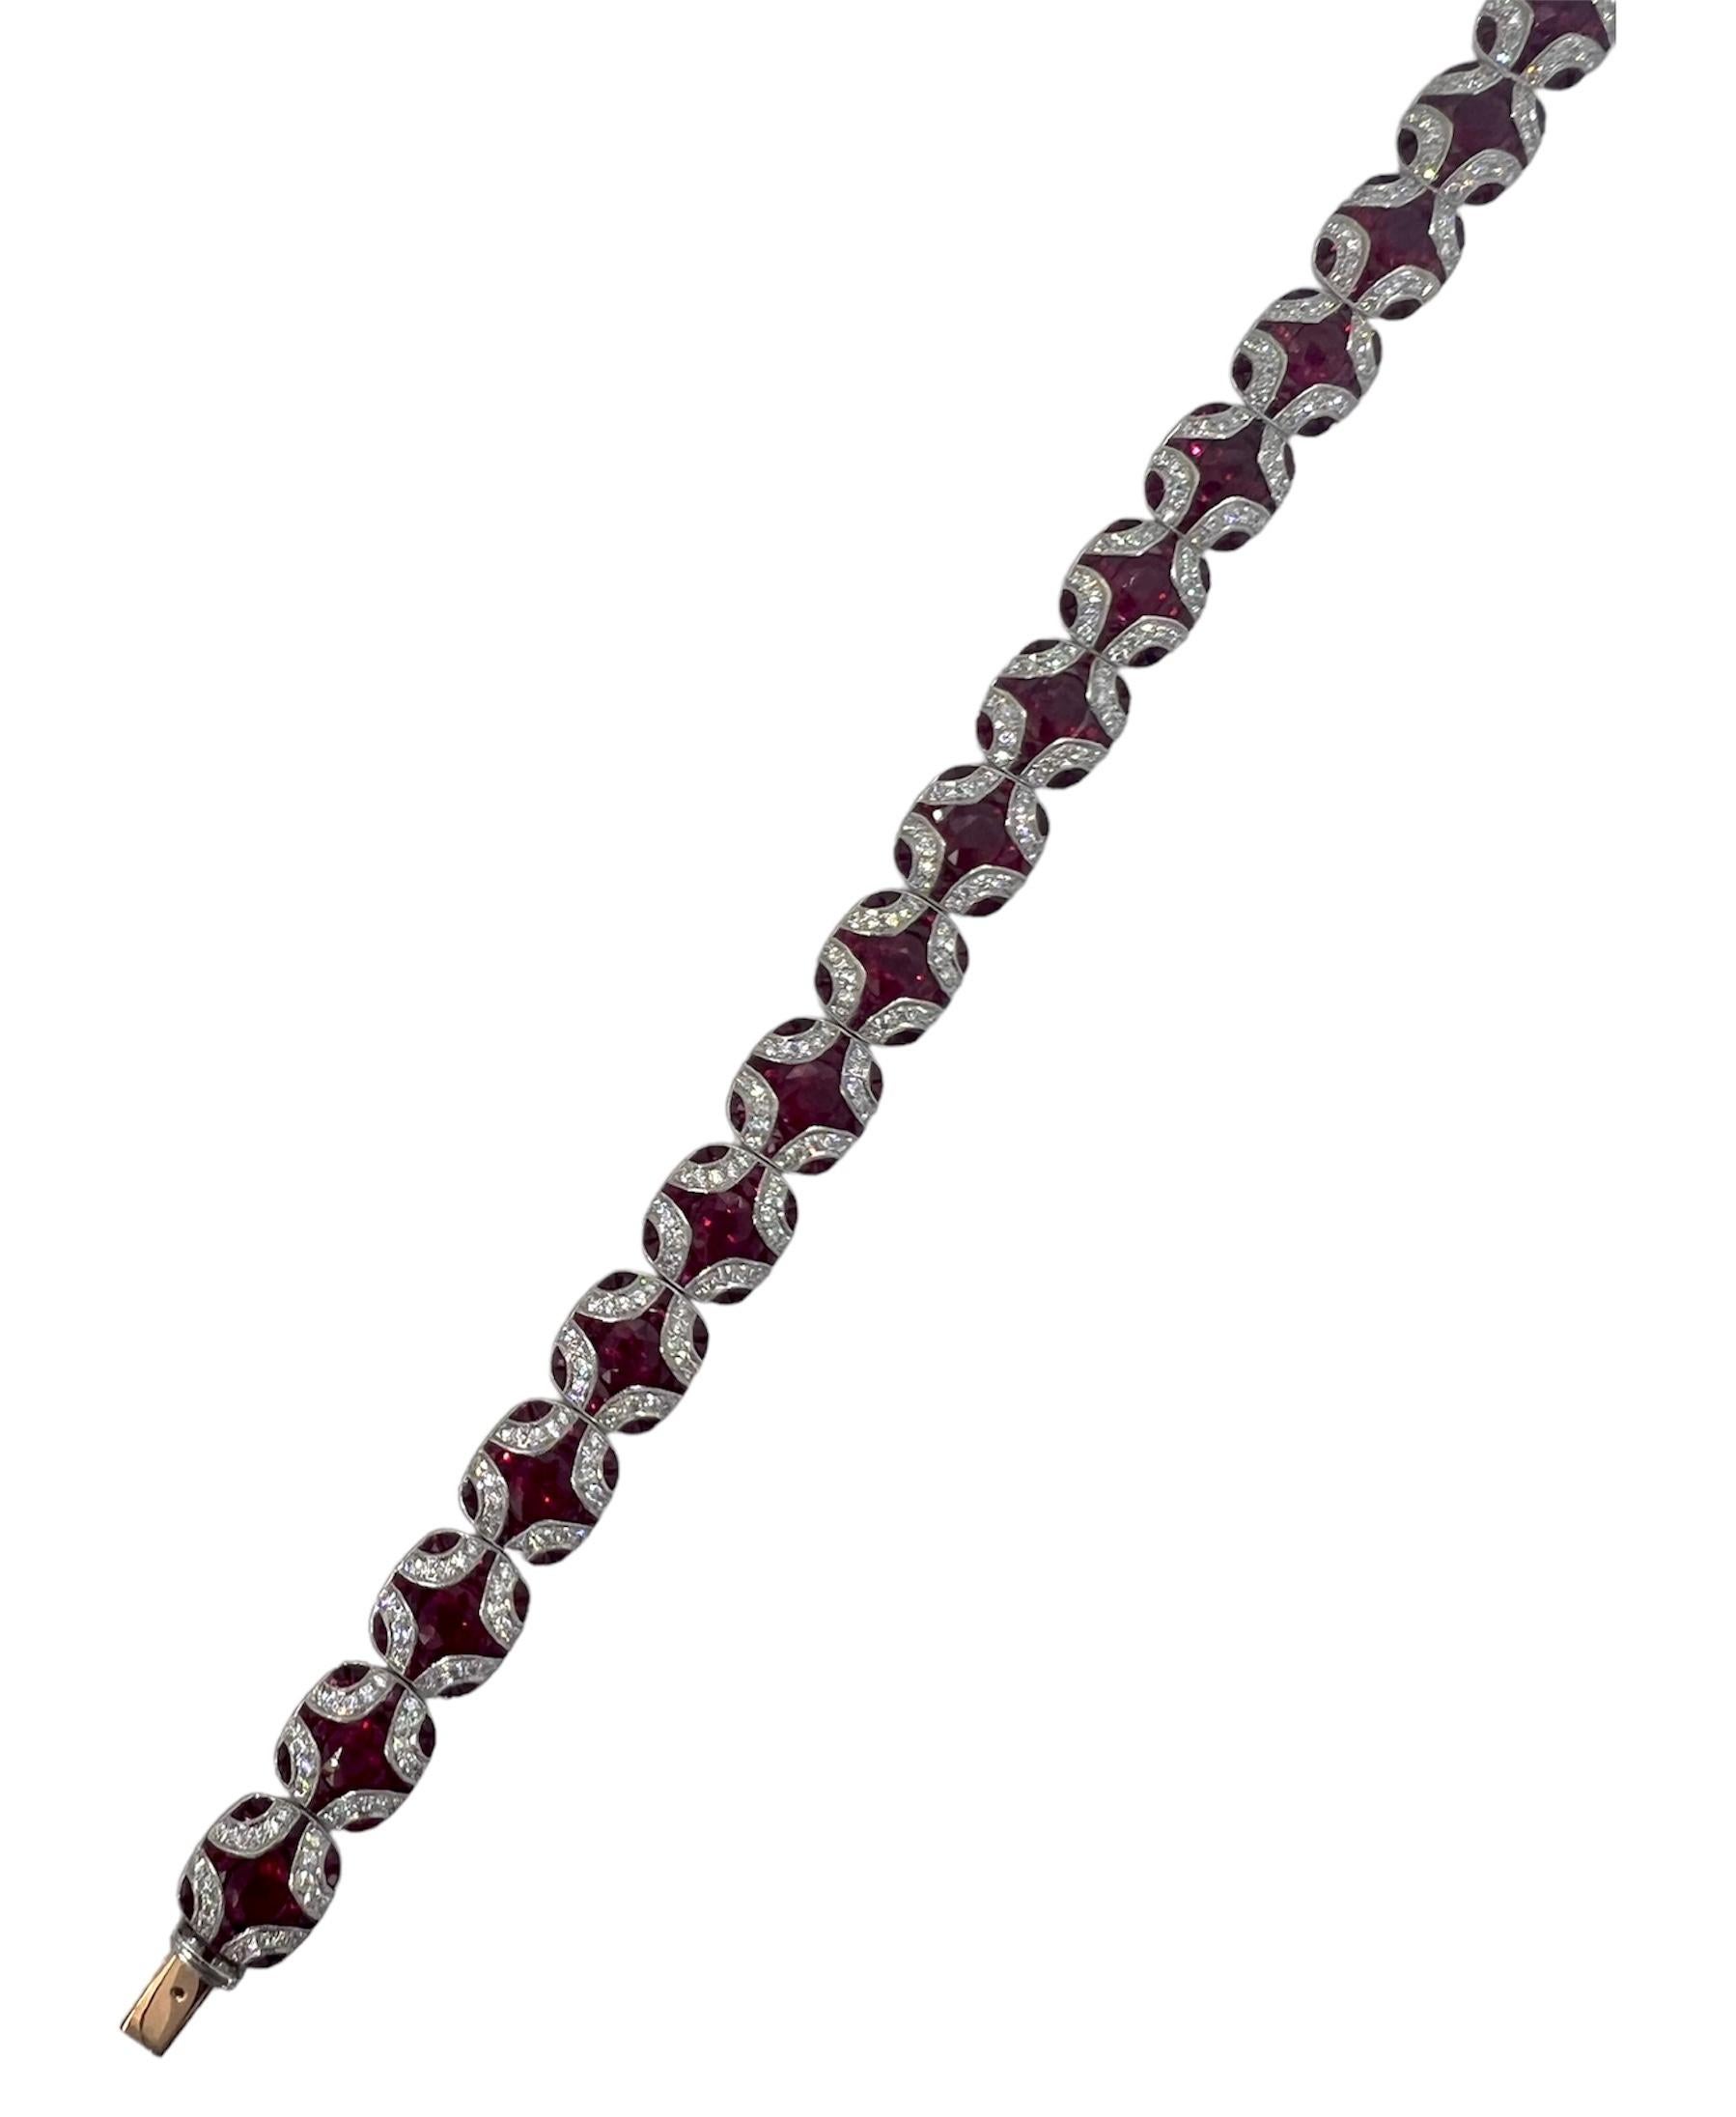 Sophia D. platinum bracelet with 10.55 carats ruby and 1.67 carats diamond.

Sophia D by Joseph Dardashti LTD has been known worldwide for 35 years and are inspired by classic Art Deco design that merges with modern manufacturing techniques.